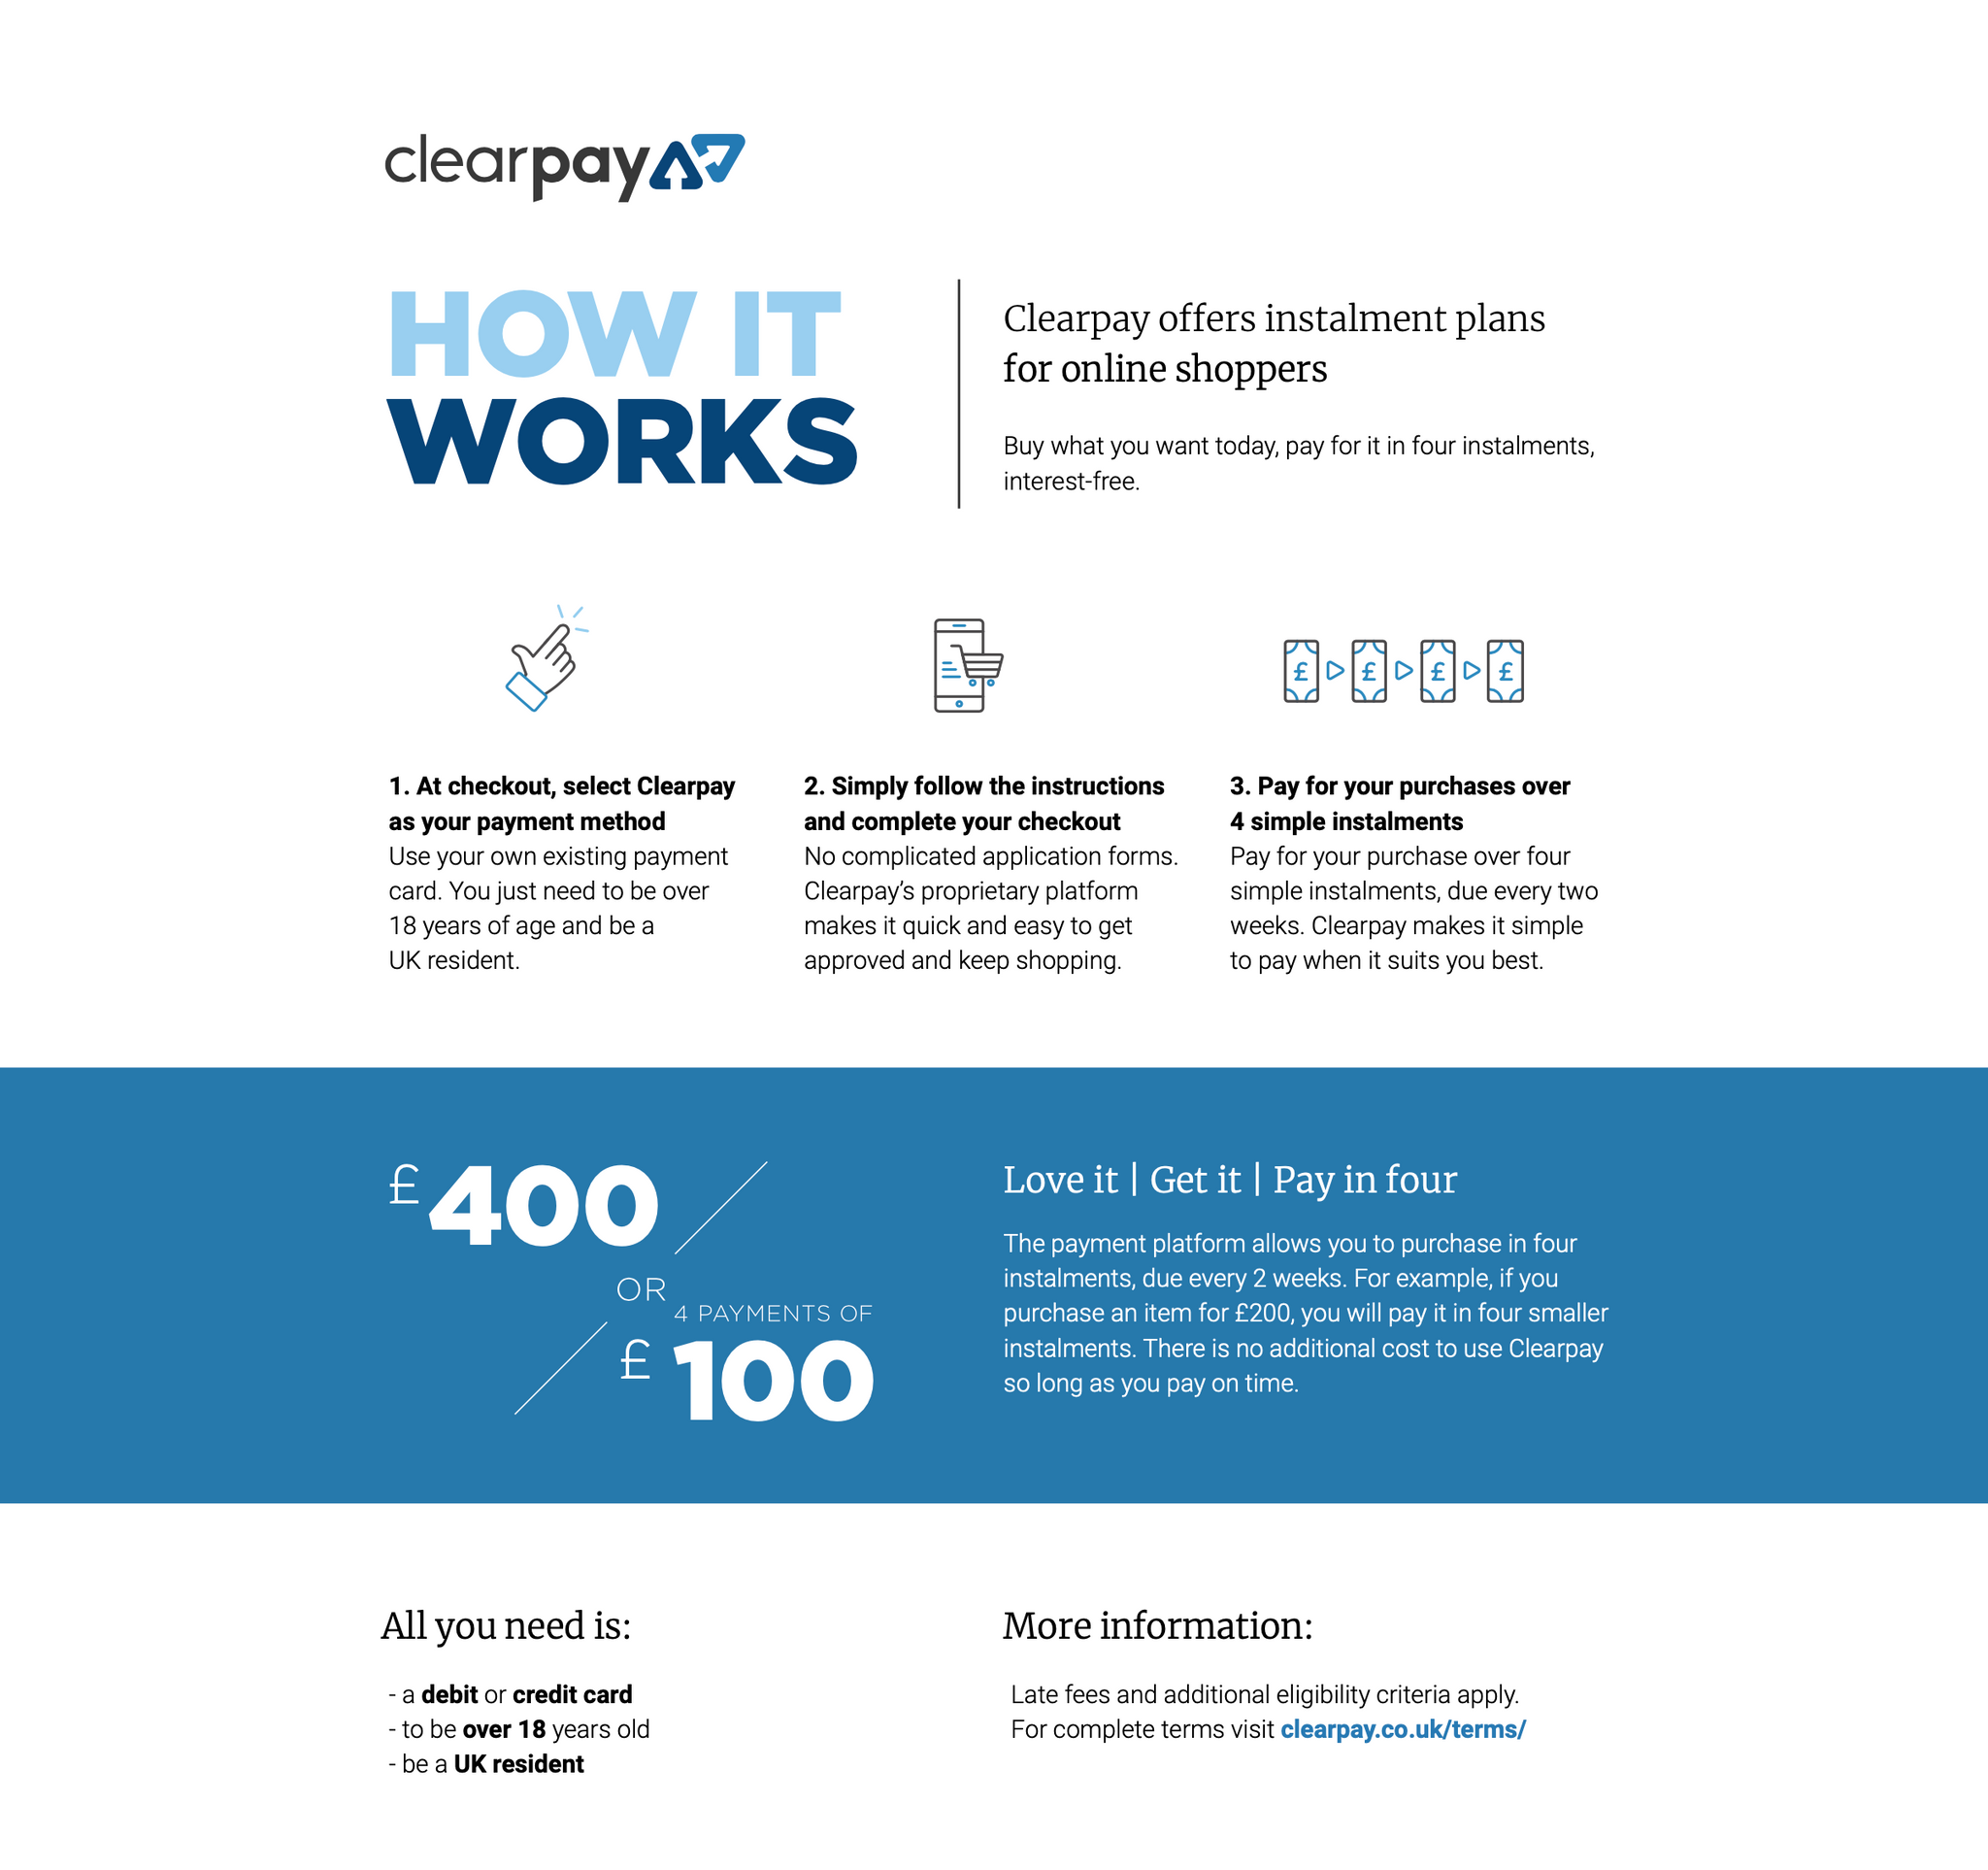 CLEARPAY - How it works